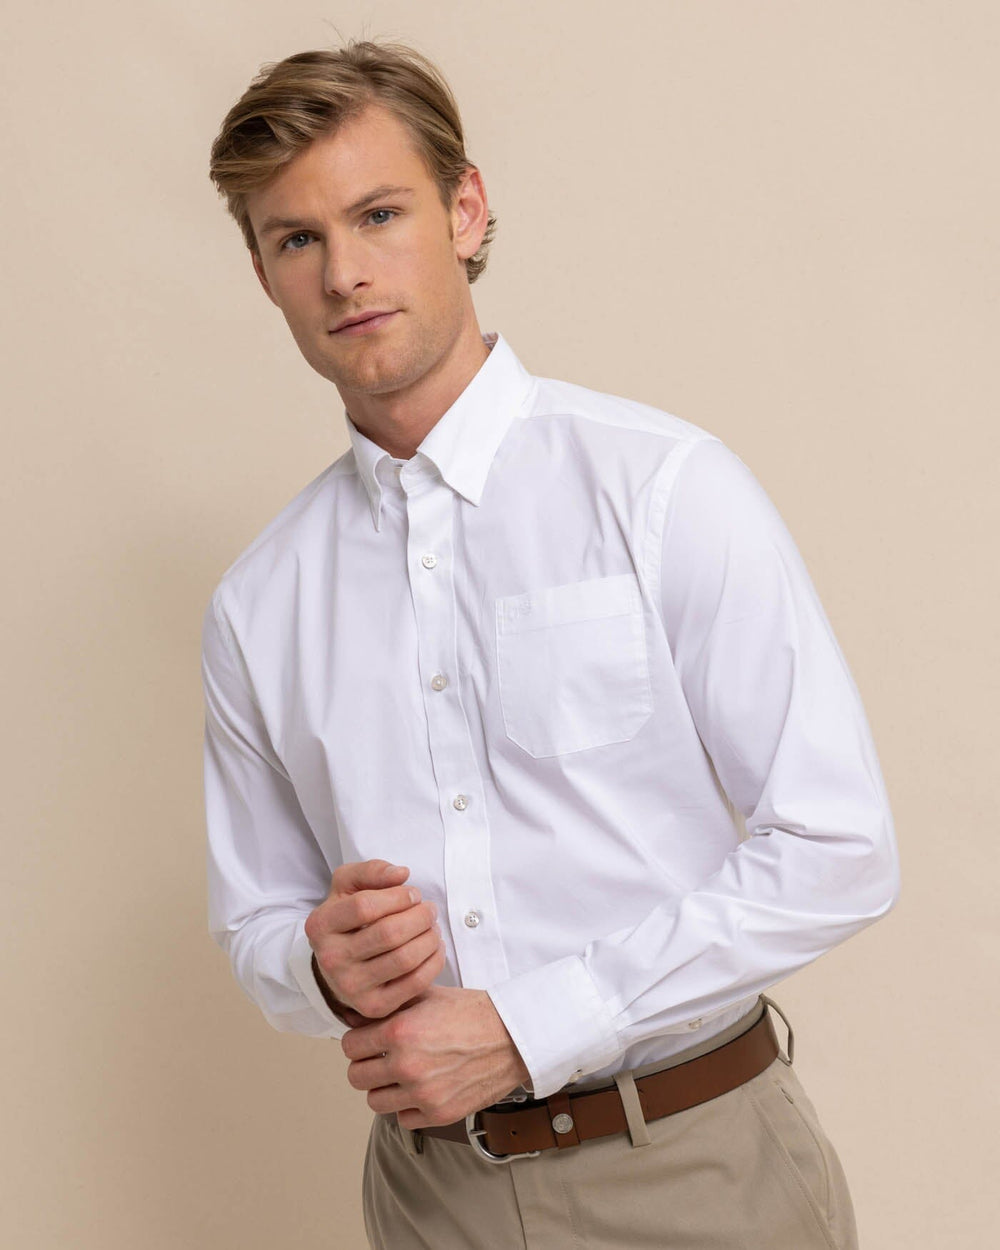 The front view of the Southern Tide Charleston Overbrook Solid Long Sleeve Sport Shirt by Southern Tide - Classic White